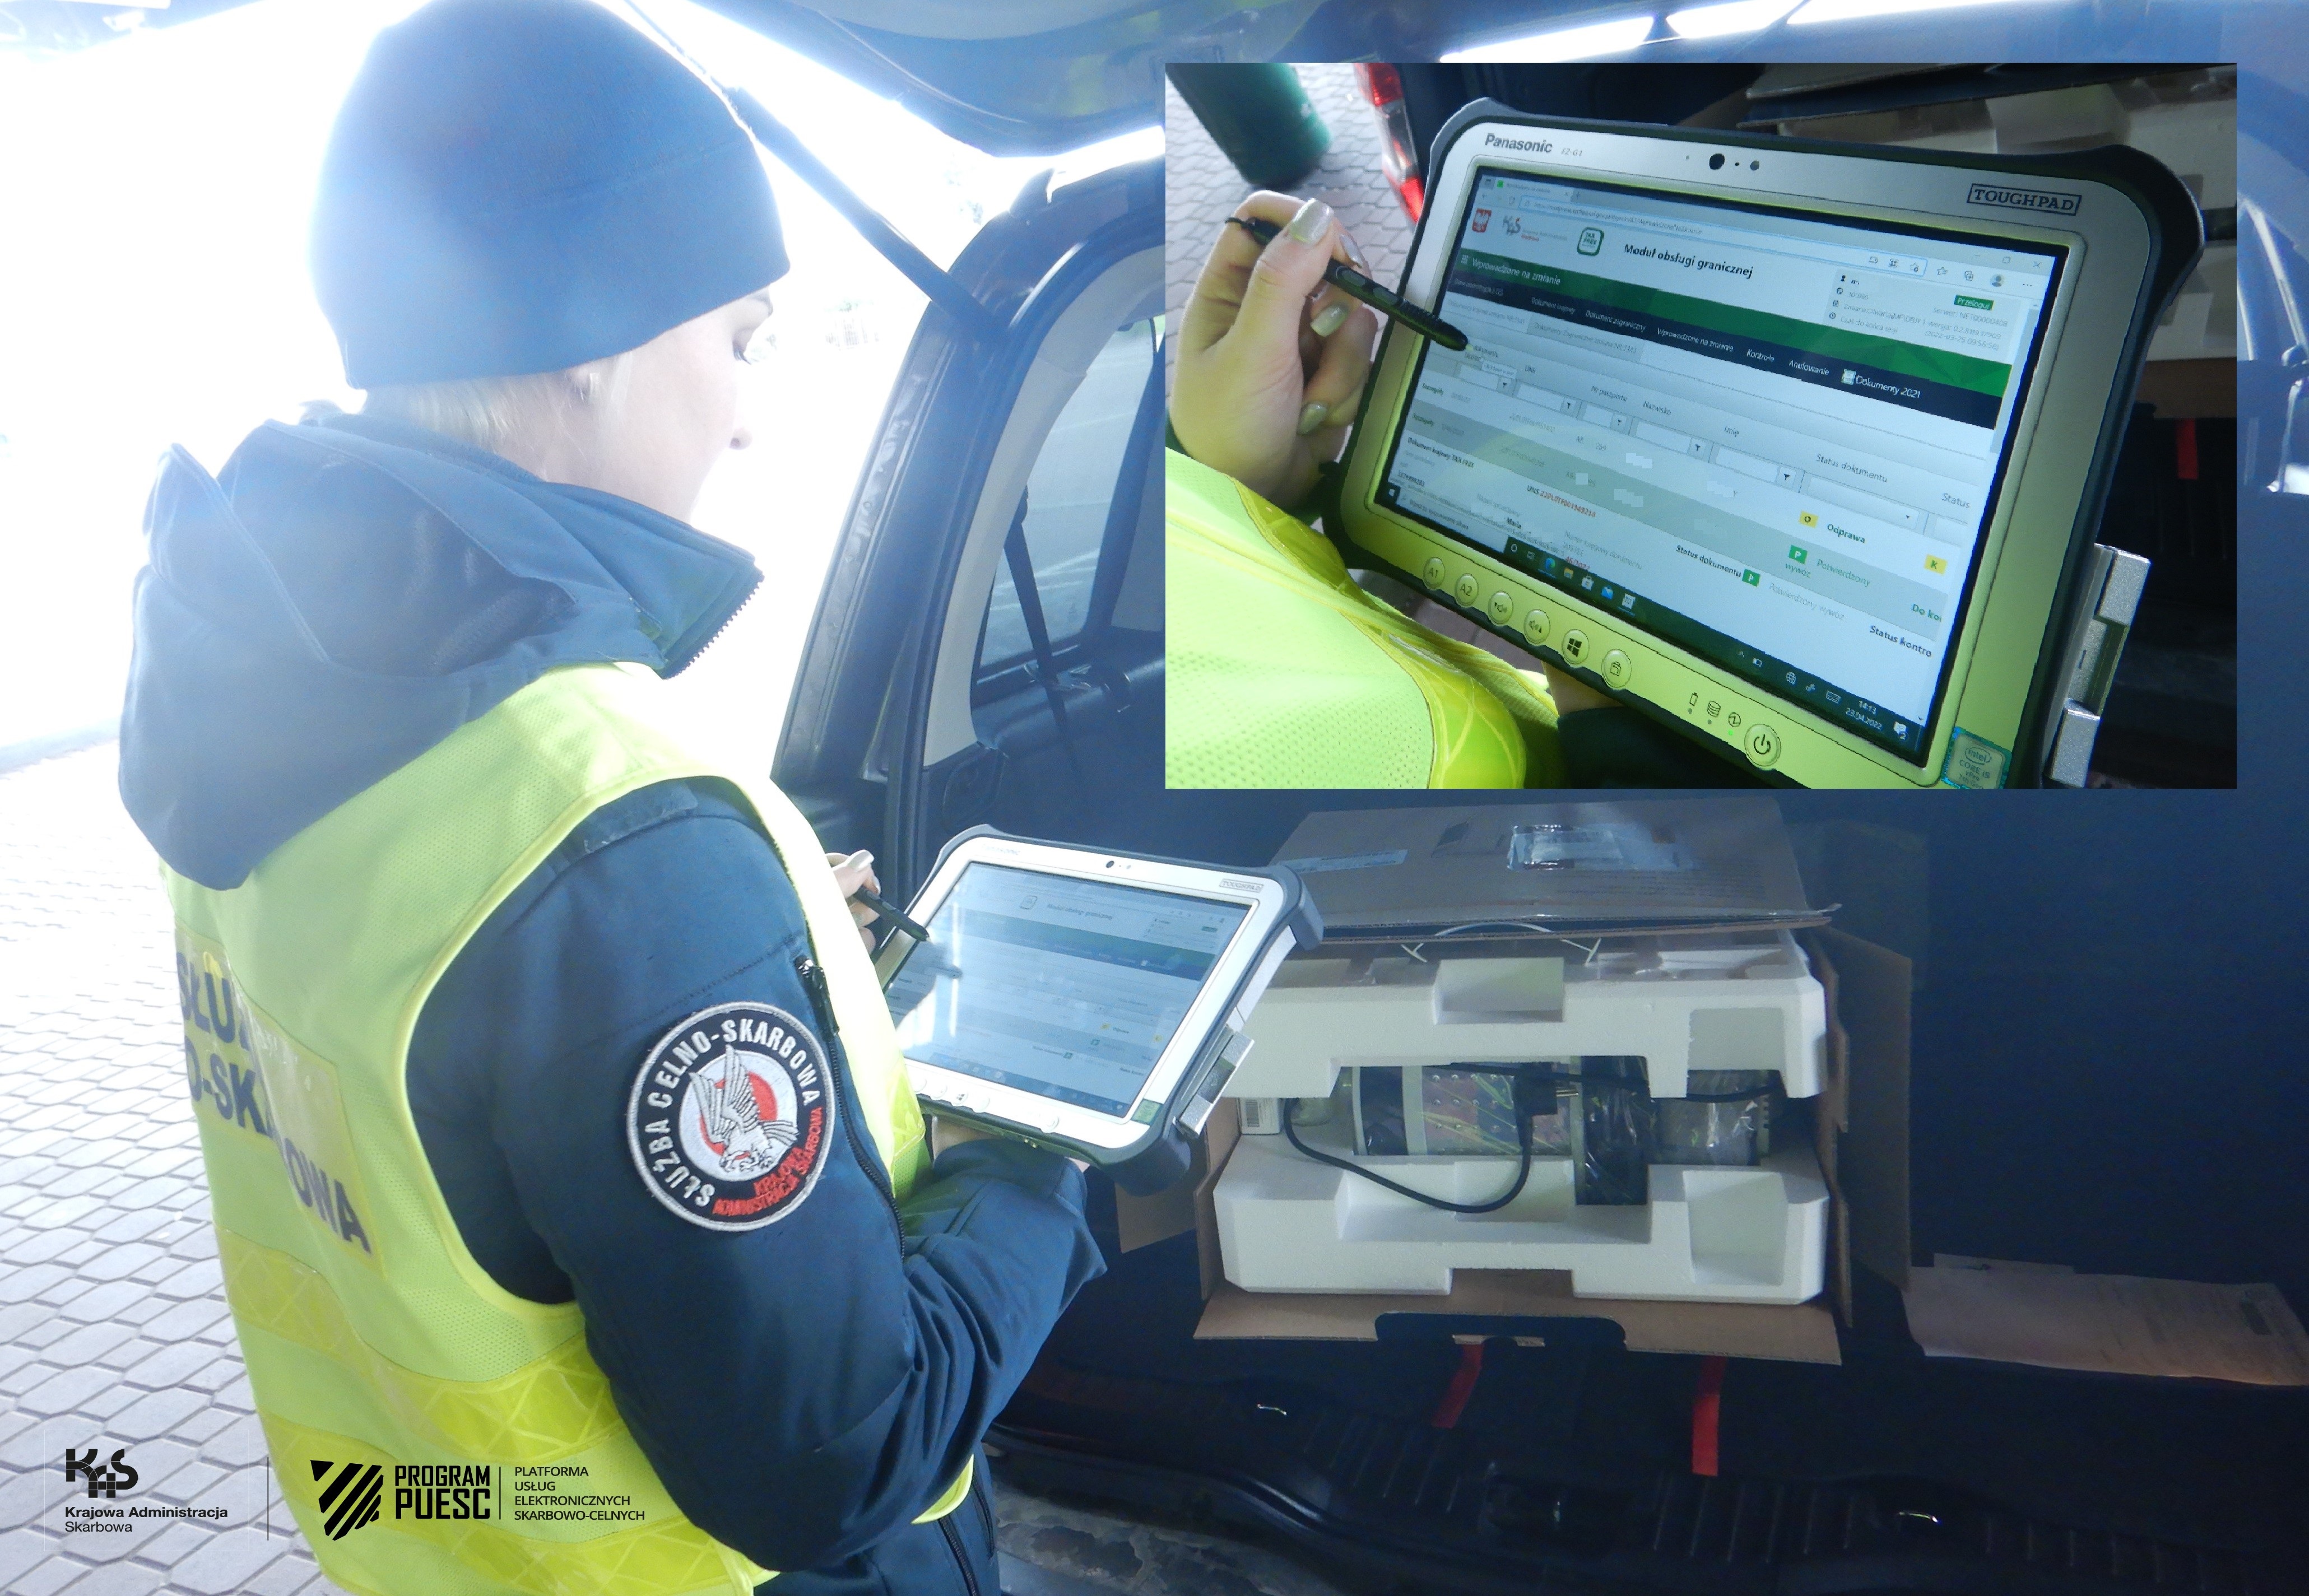 An officer operating a tablet at the border crossing, in the background you can see a car with an open trunk and an open cardboard box inside.